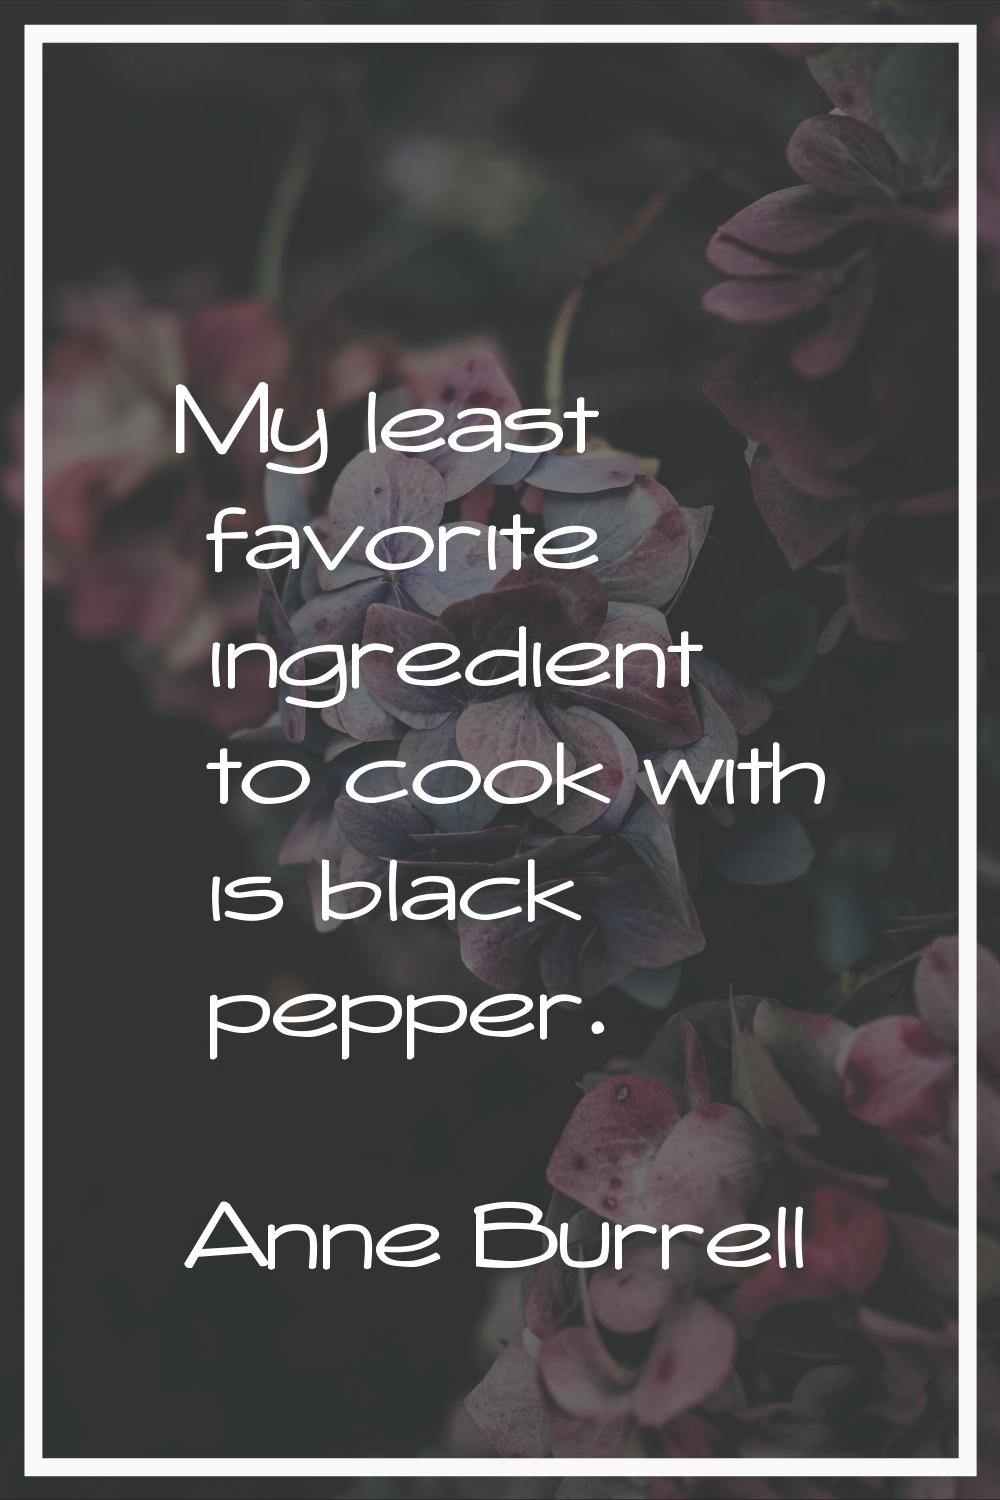 My least favorite ingredient to cook with is black pepper.